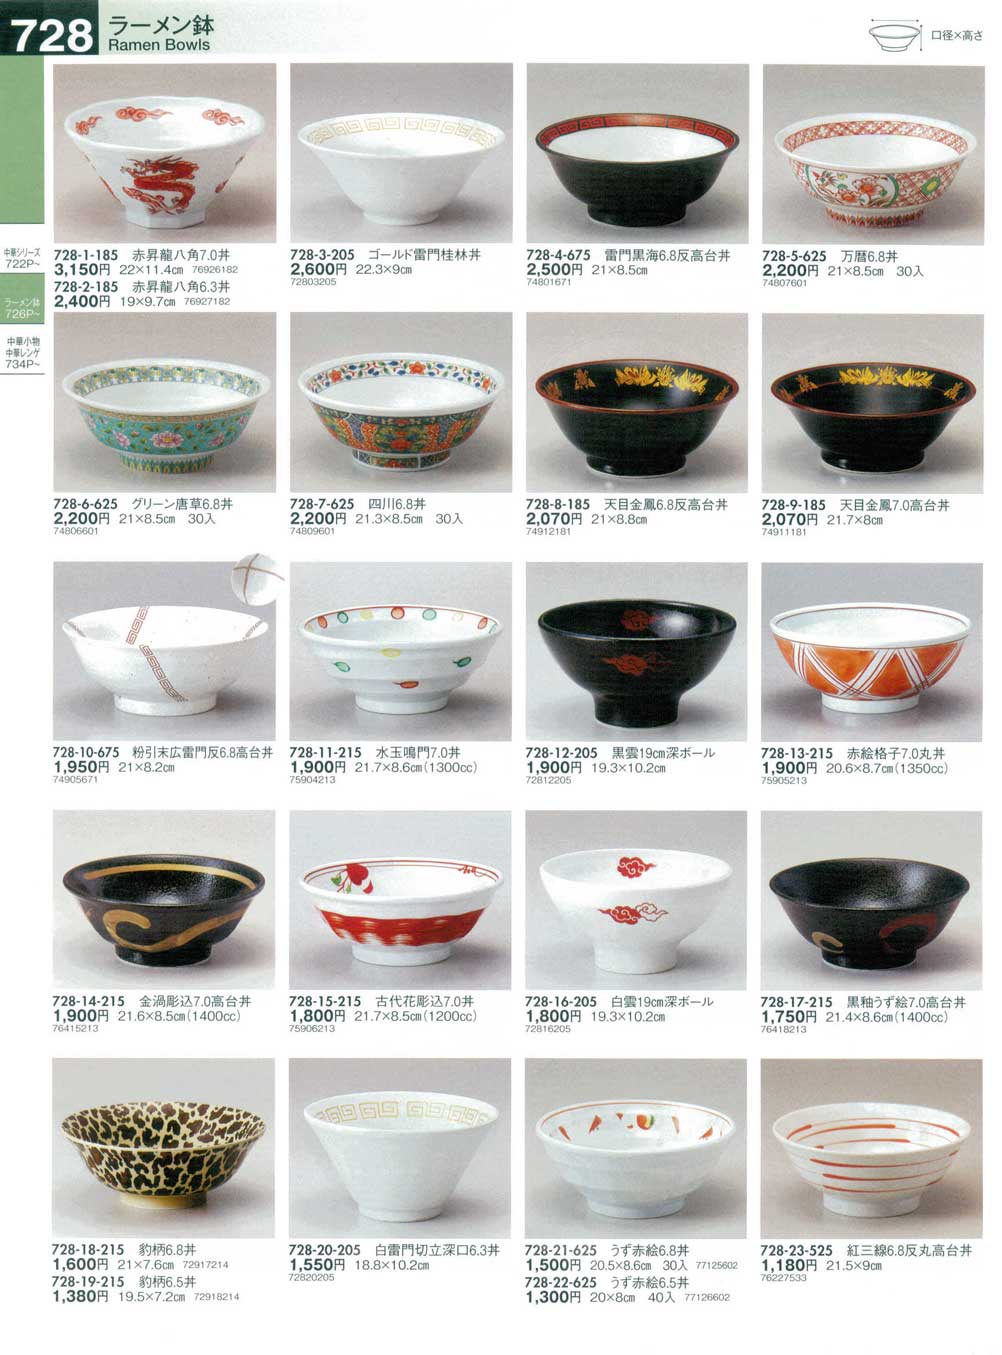 Gutter måtte Bred vifte Page 728 - Ramen Bowls / Steamed rice bowl Chinese styled / utuwa15 -  Japanese Tableware